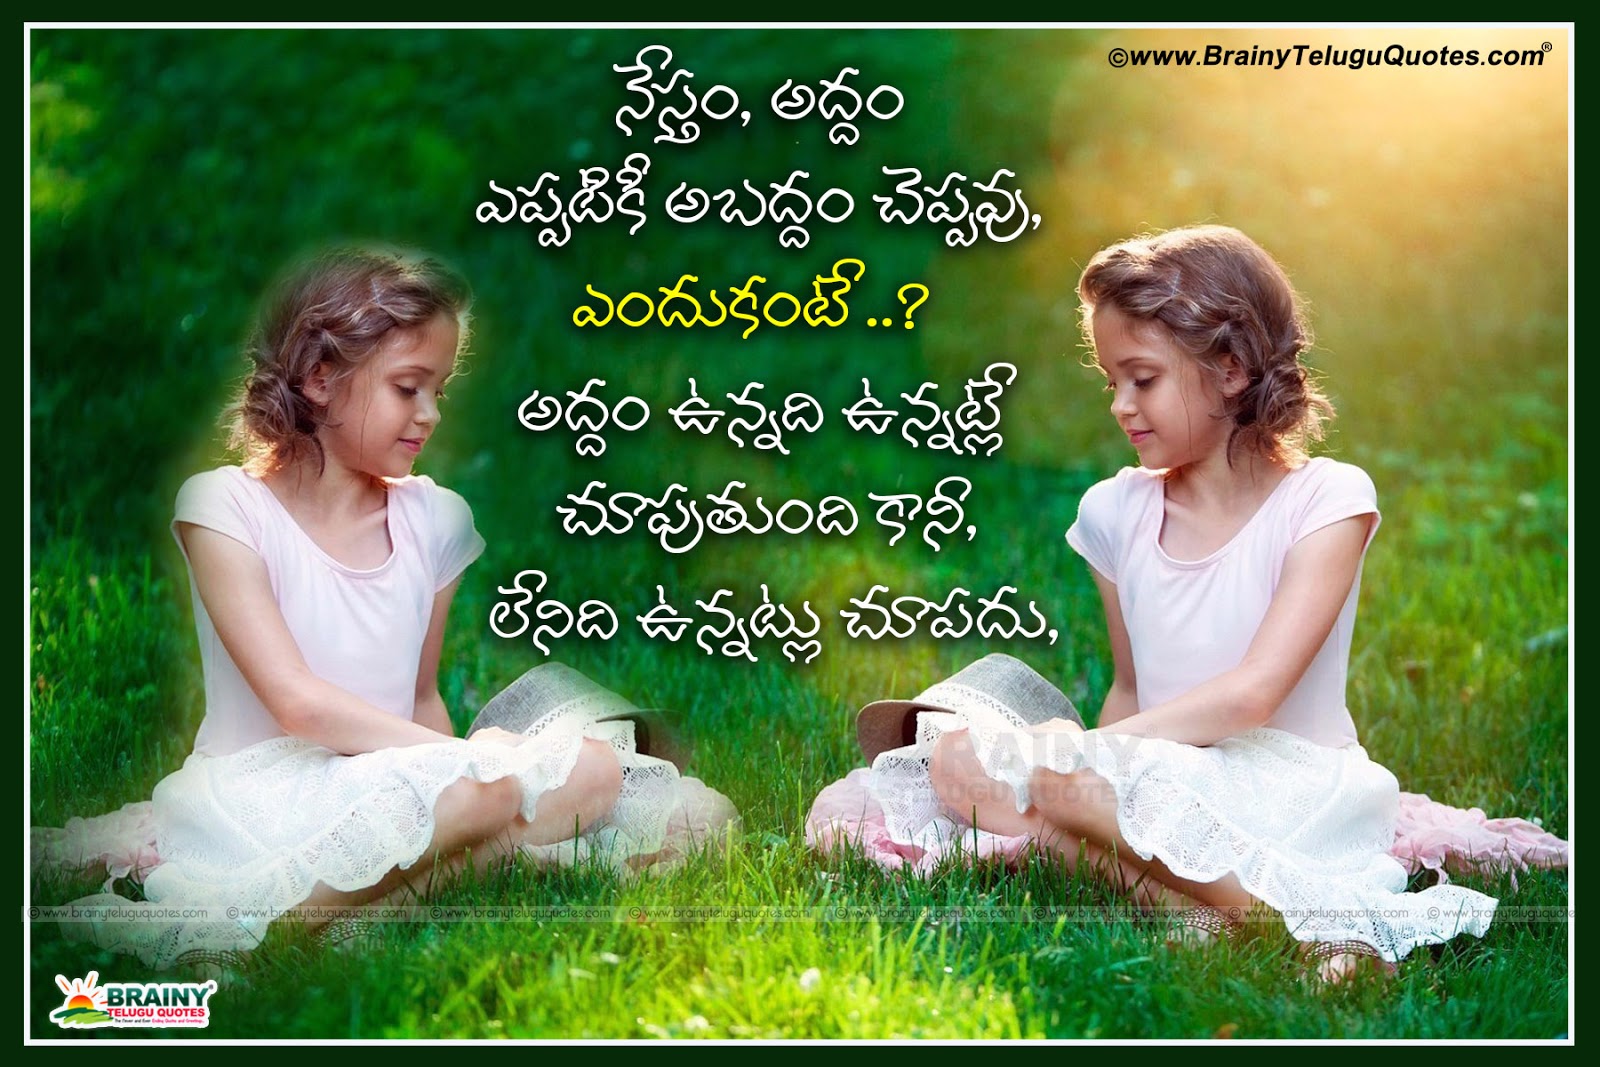 Beautiful Friendship Messages And Quotes In Telugu Images | Brainyteluguquotes.comtelugu Quotes|English Quotes|Hindi Quotes|Tamil Quotes |Greetings